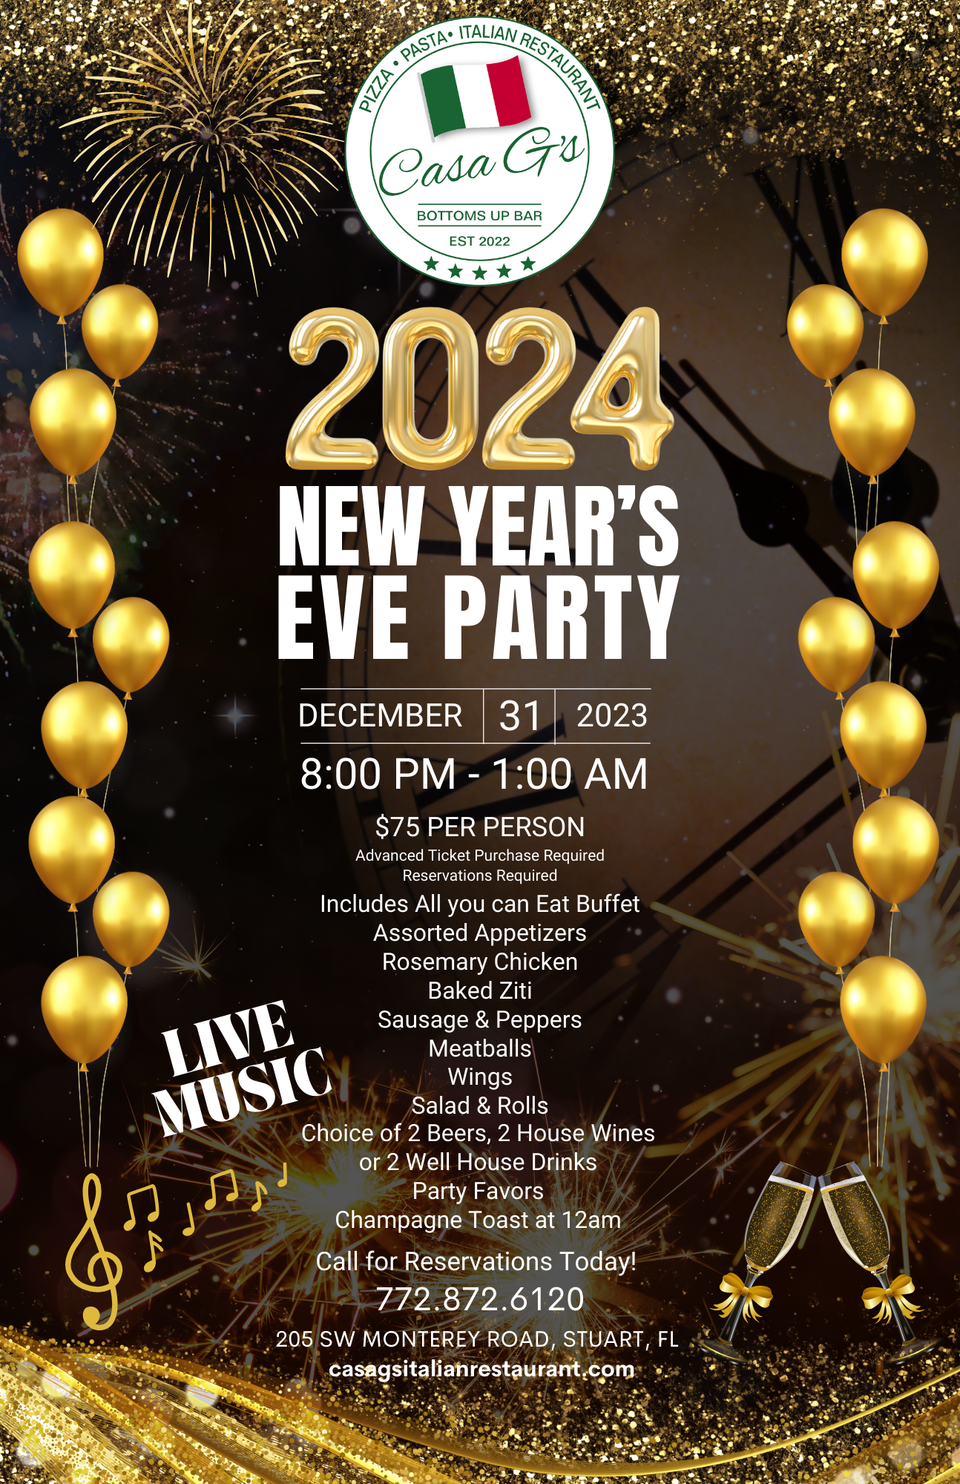 Casa g's new year's eve party updated 11 14 23